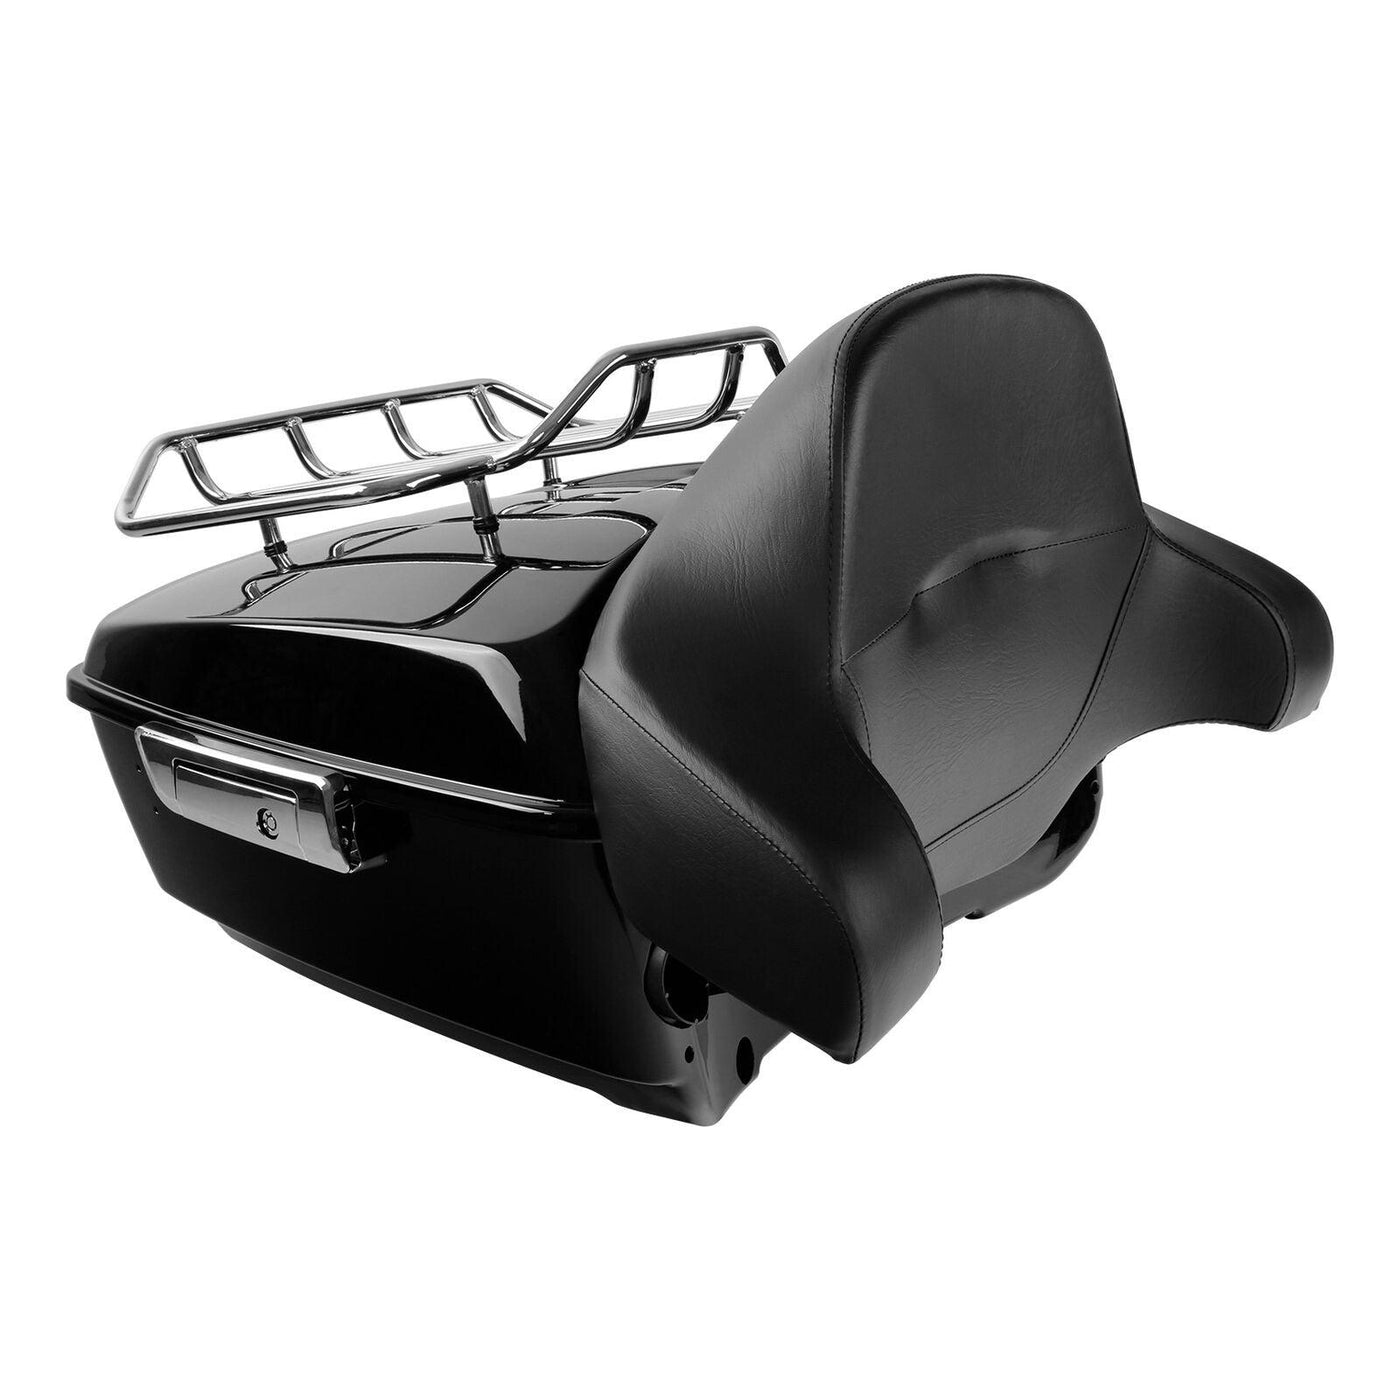 King Pack Trunk Backrest Mount Rack Fit For Harley Tour Pak Softail Fat Boy08-16 - Moto Life Products